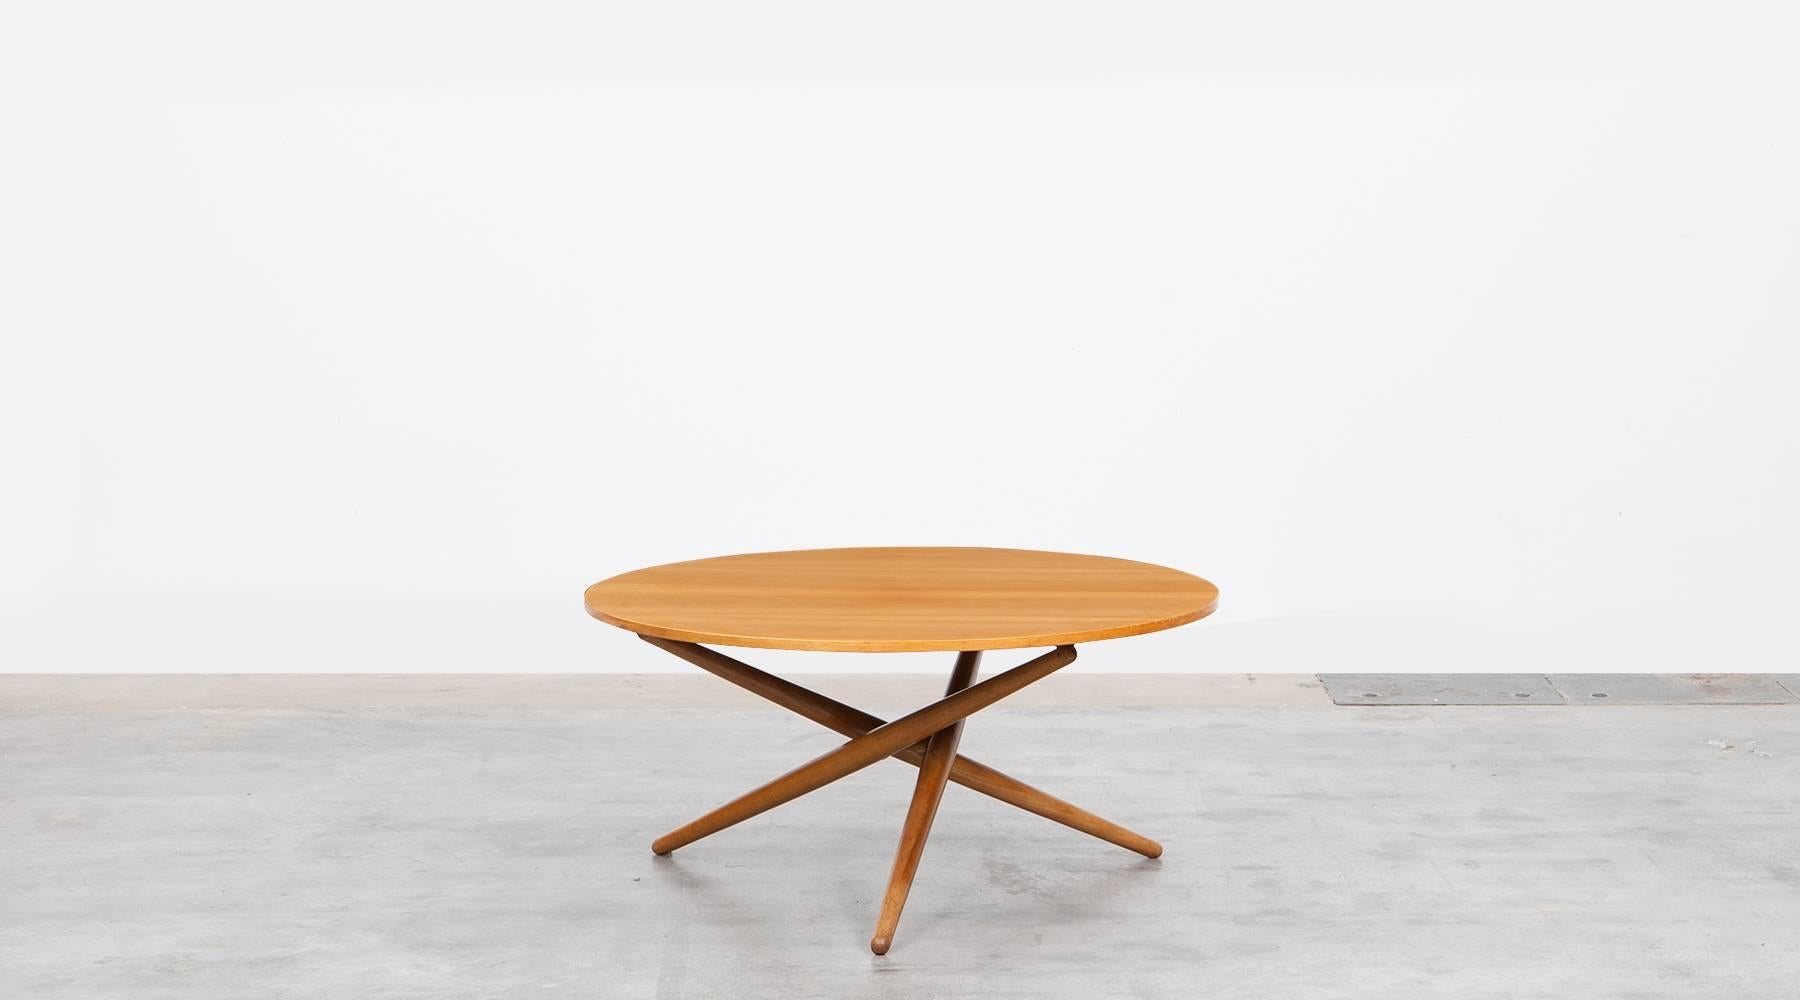 Eat and Tea Table with tabletop in teak by Jürg Bally, Switzerland, 1951.

Eat and tea table designed by Jürg Bally comes with a tabletop in teak on three wooden legs. This model strongly reminds of a Side Table by US designer T.H. Robsjohn-Gibbings